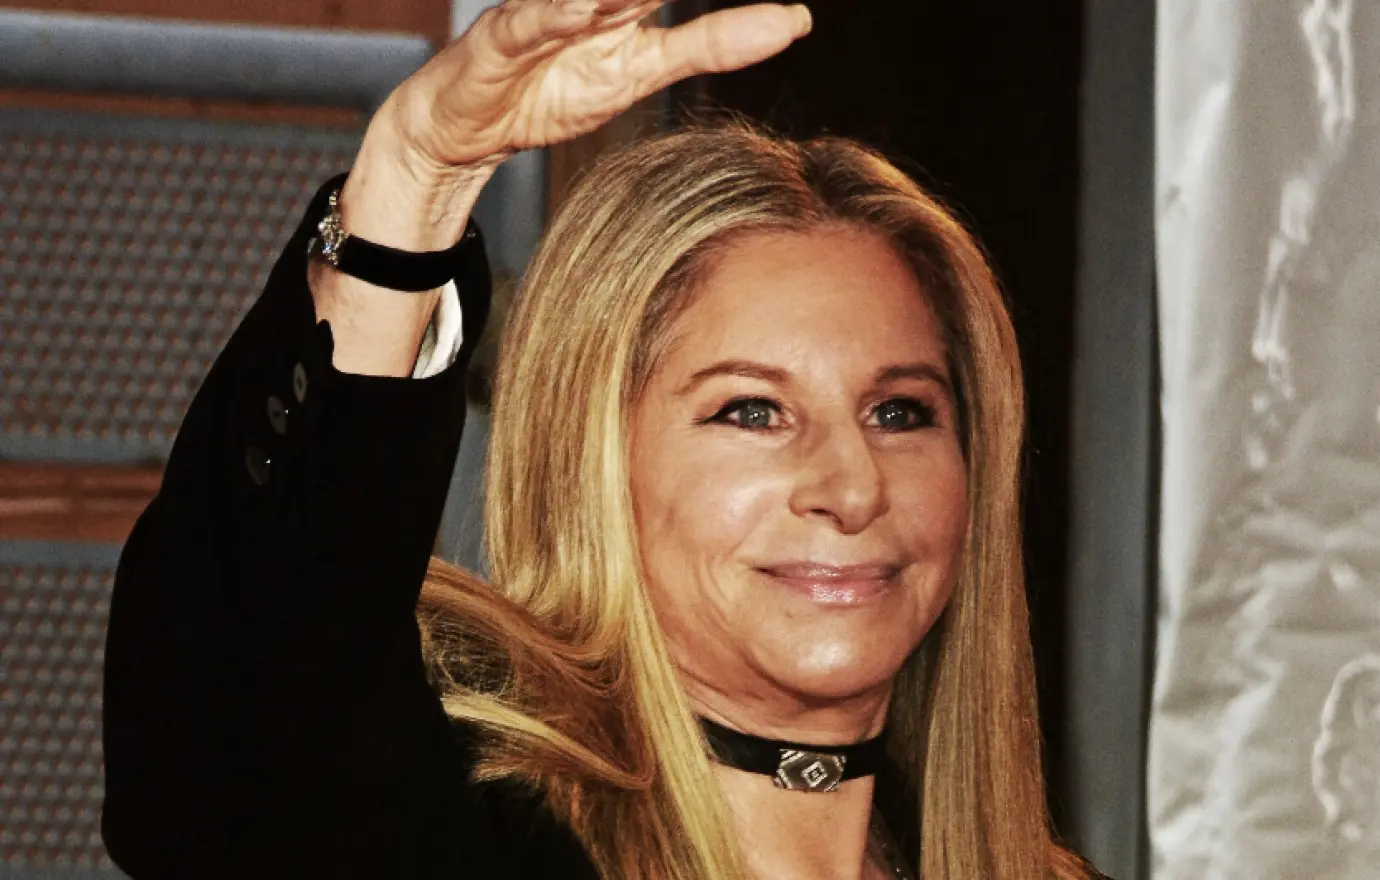 Barbara Streisand Threatens To Leave Country If Conditions Don't Improve